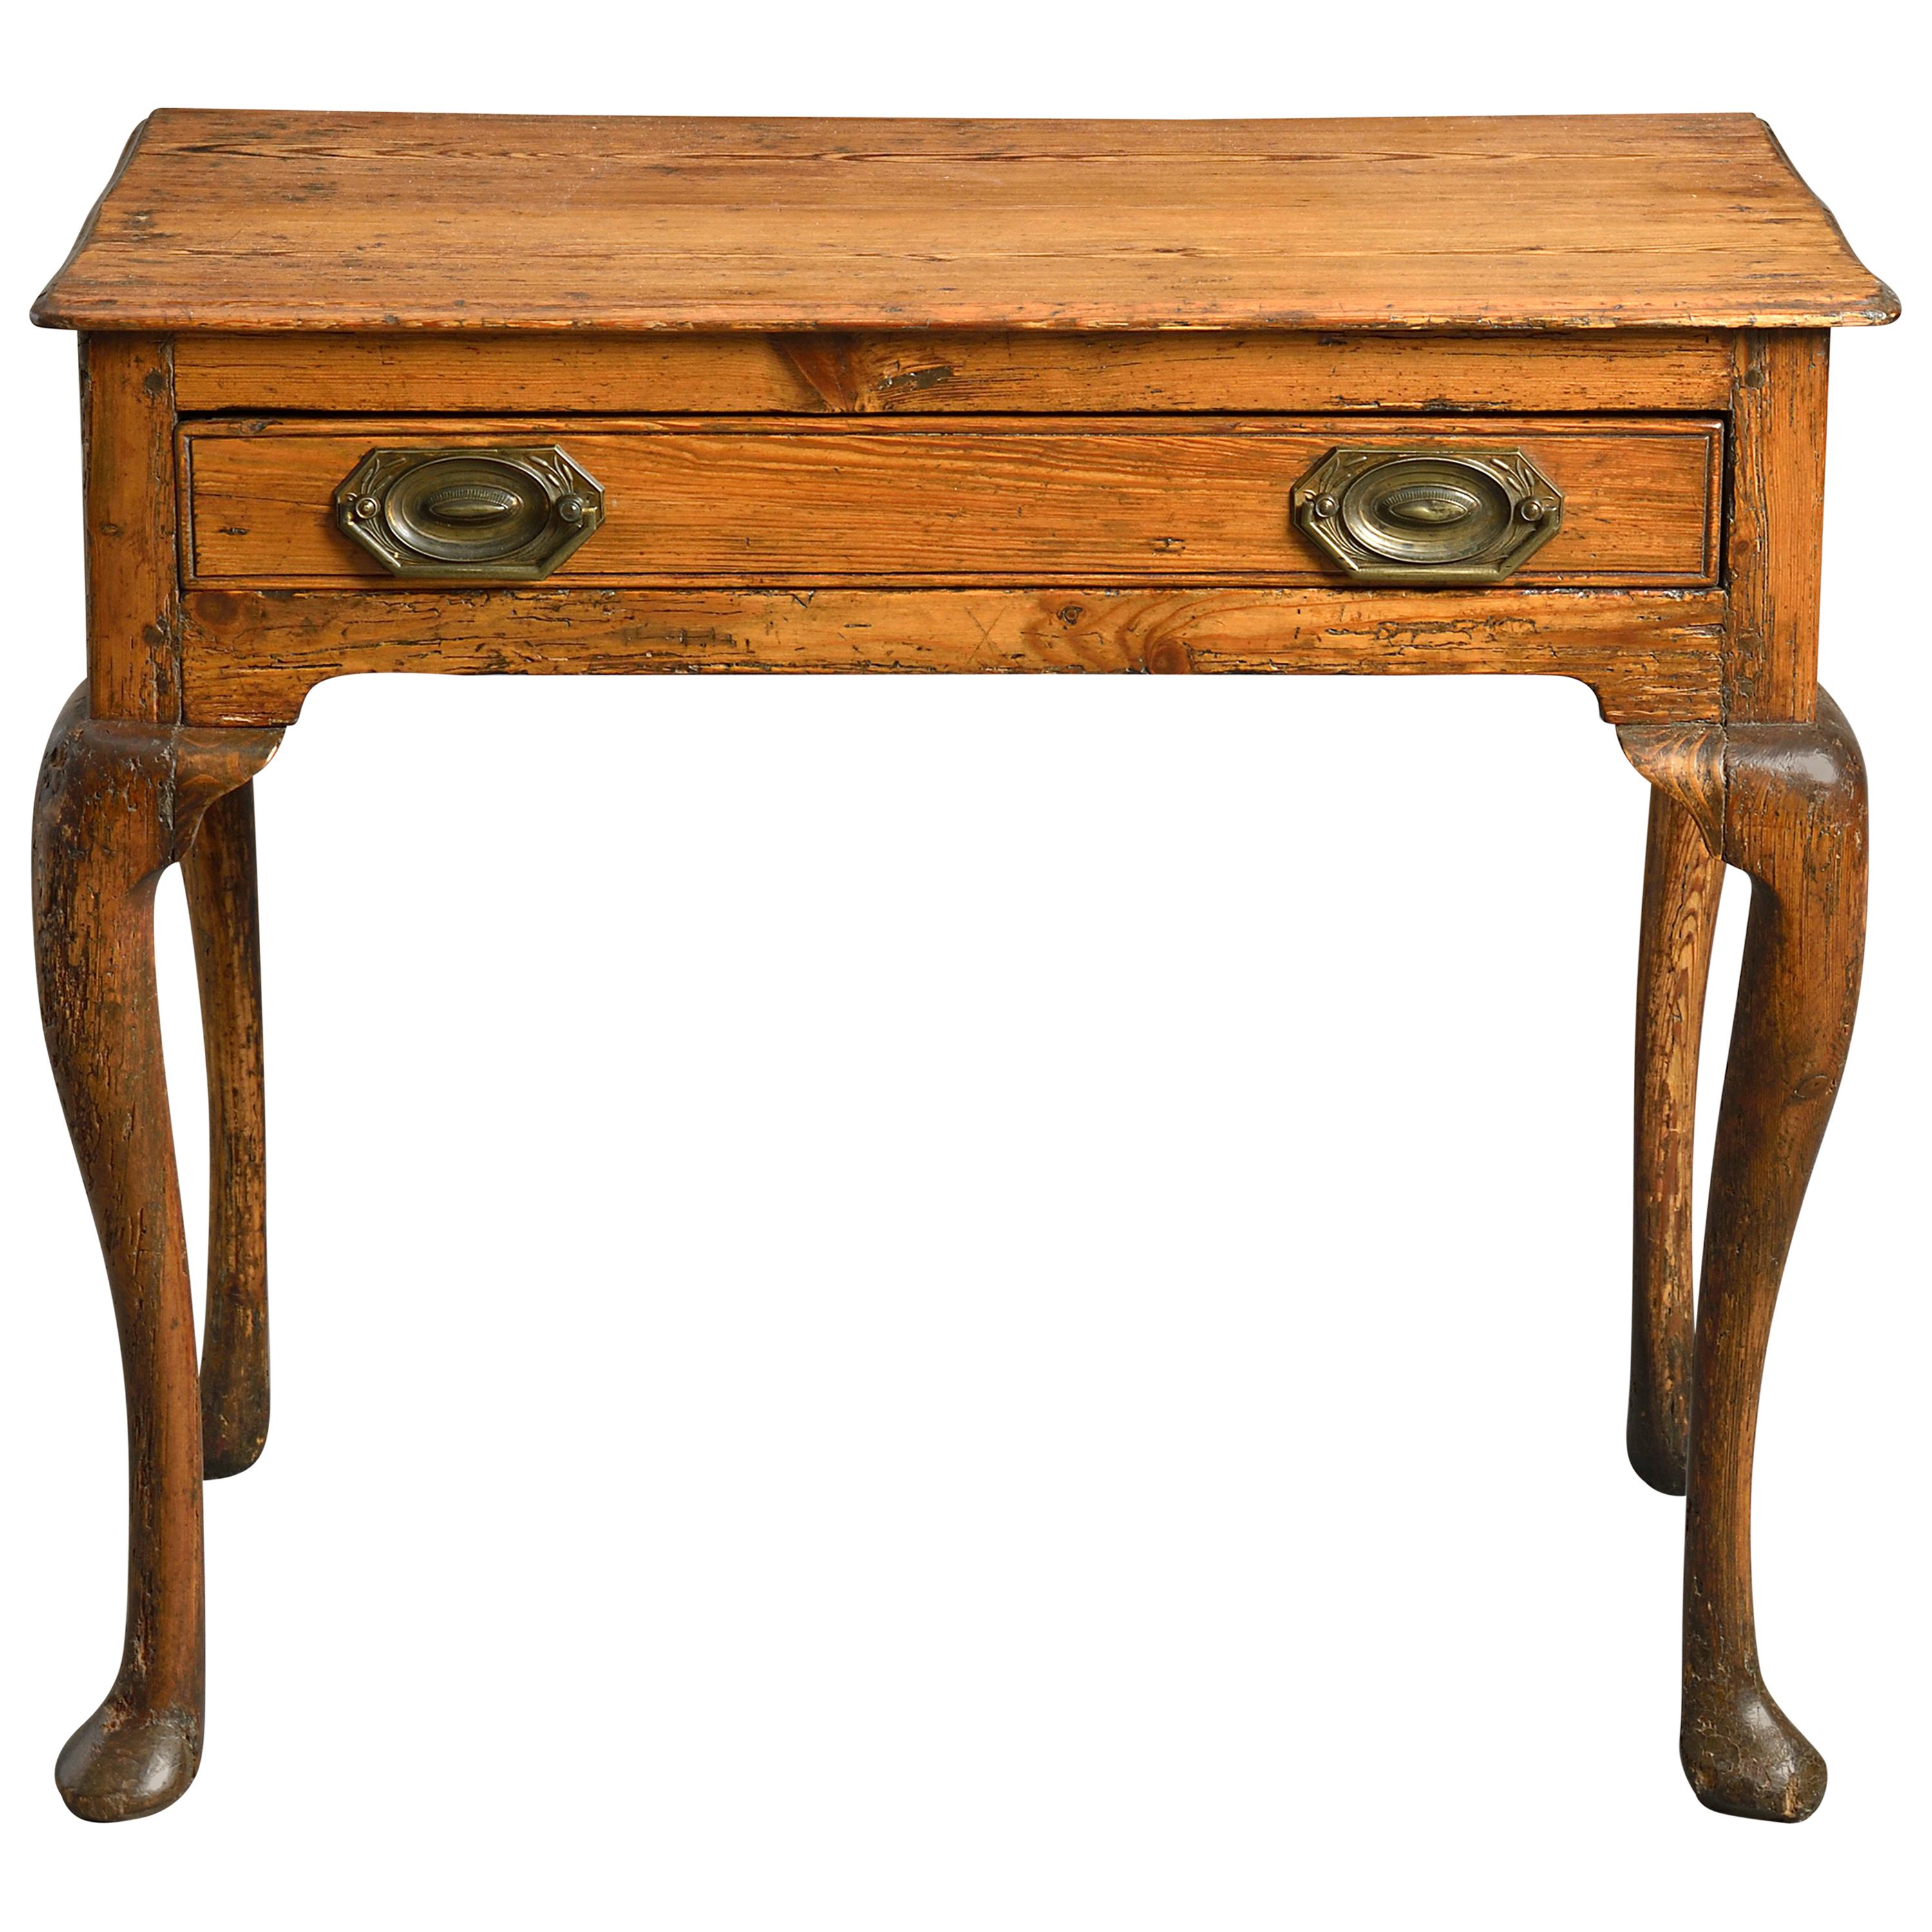 18th Century George III Period Pine Side Table